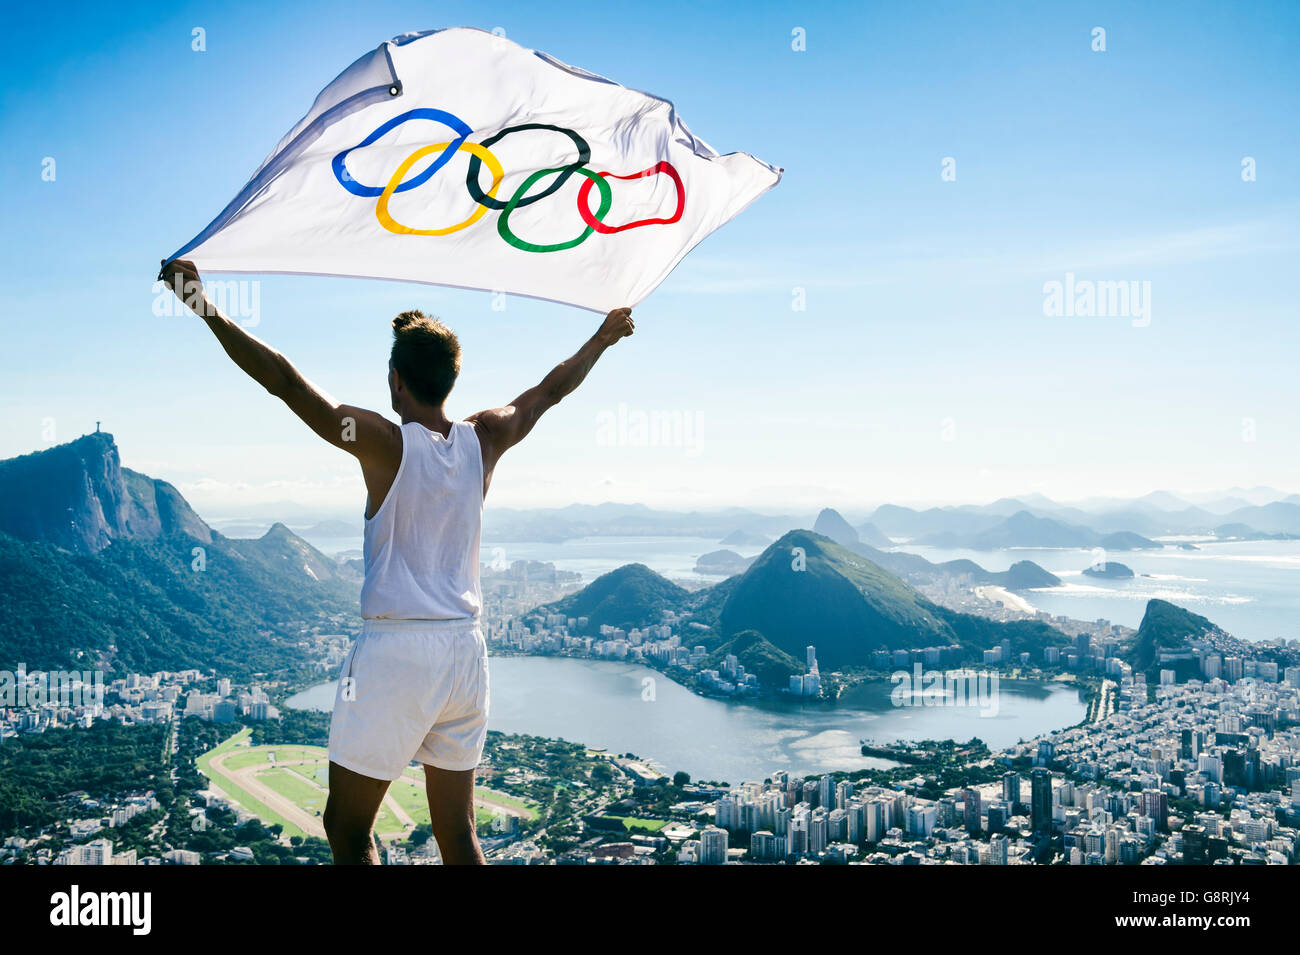 RIO DE JANEIRO - MARCH 21, 2016: Athlete stands holding Olympic flag above a city skyline view of Corcovado Mountain. Stock Photo